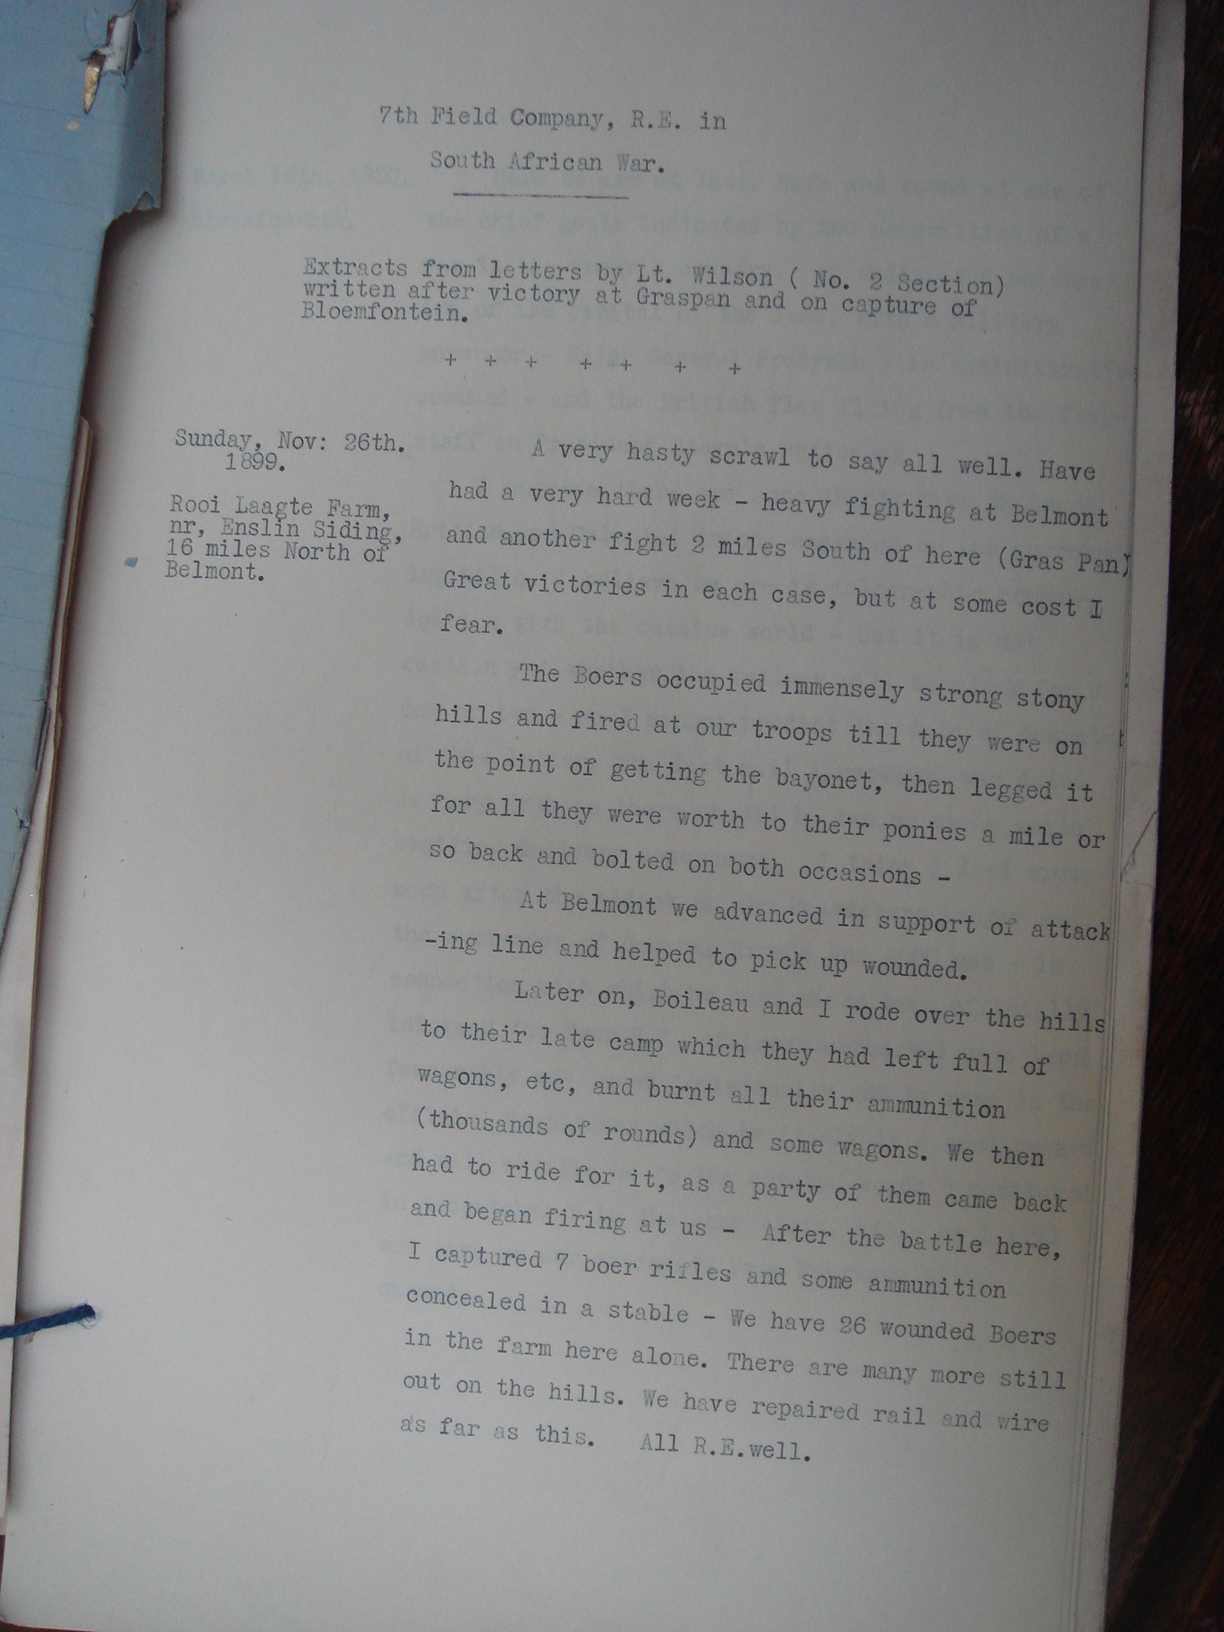 Extracts from letters of Lt Wilson No 2 Section after Capture of Bloemfontein Page 1